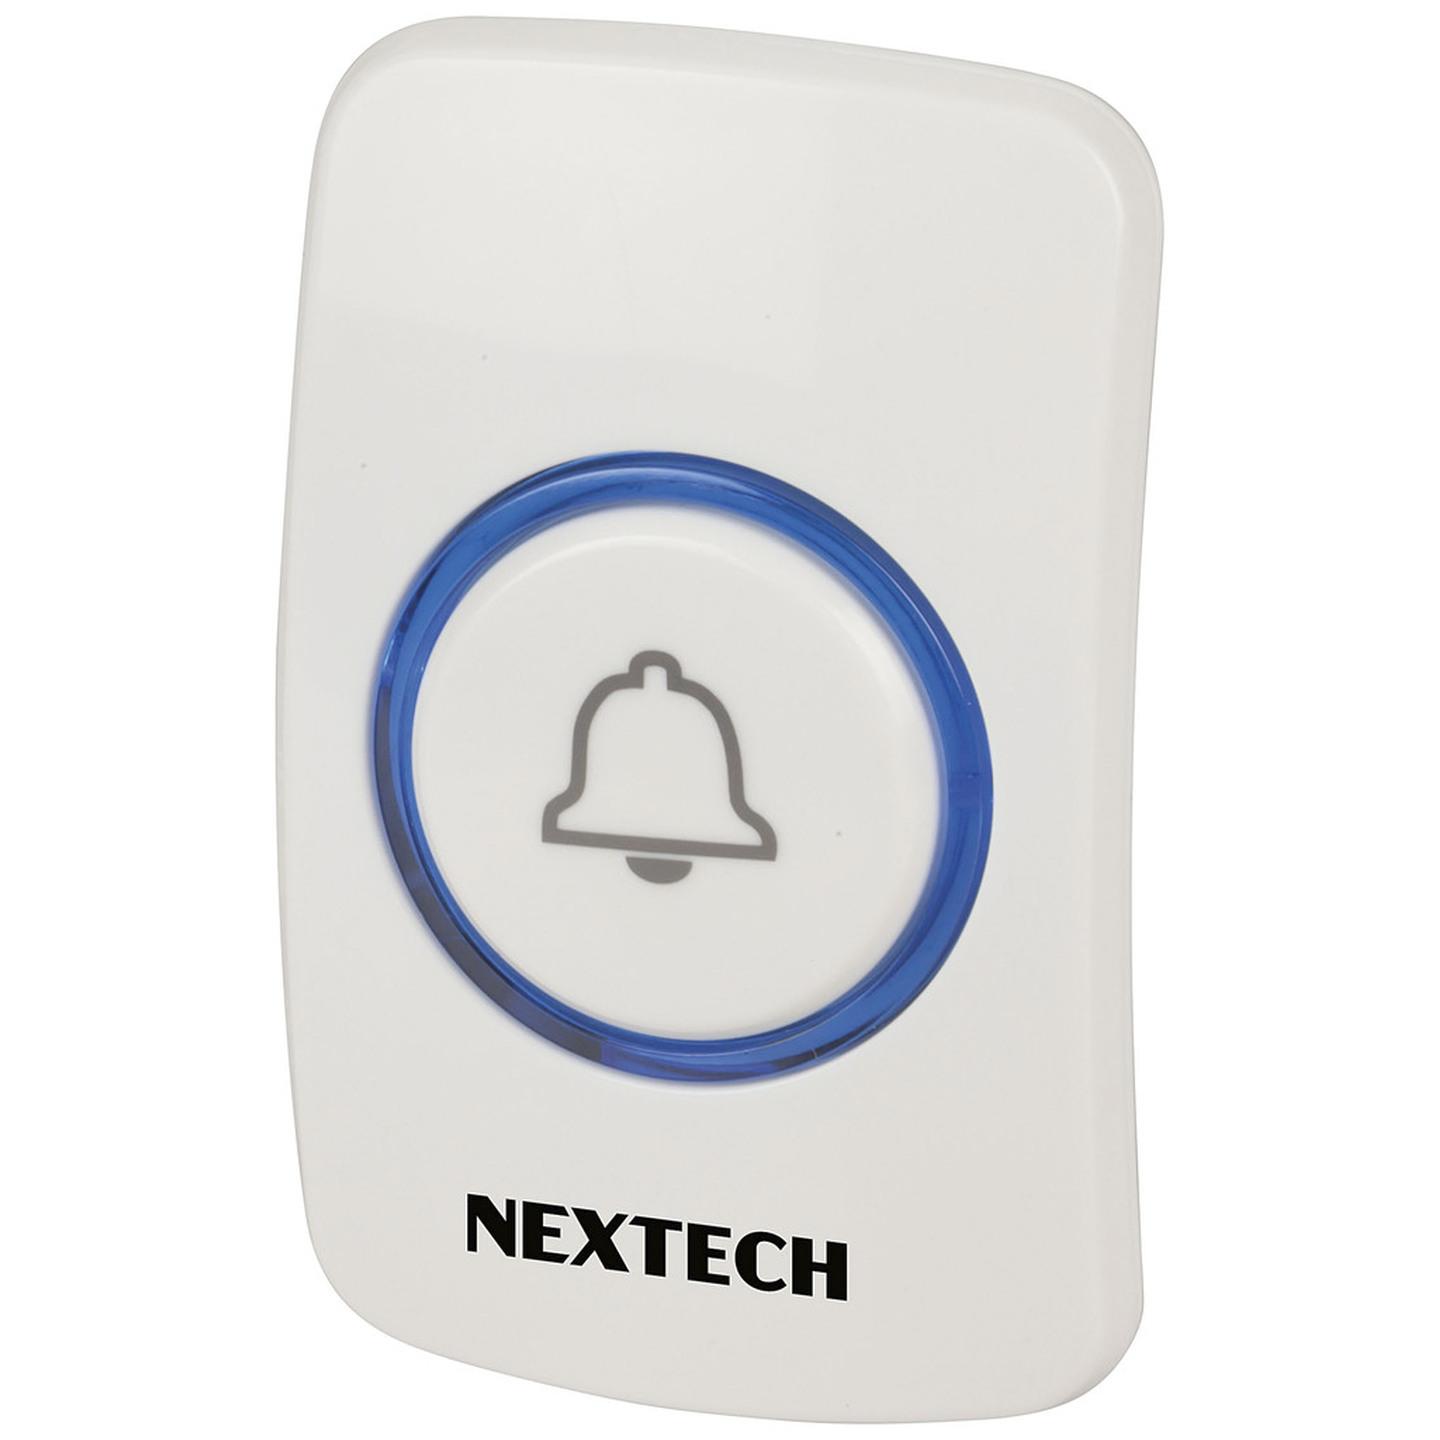 Wireless Panic Button to suit QC3870 Wi-Fi Camera System